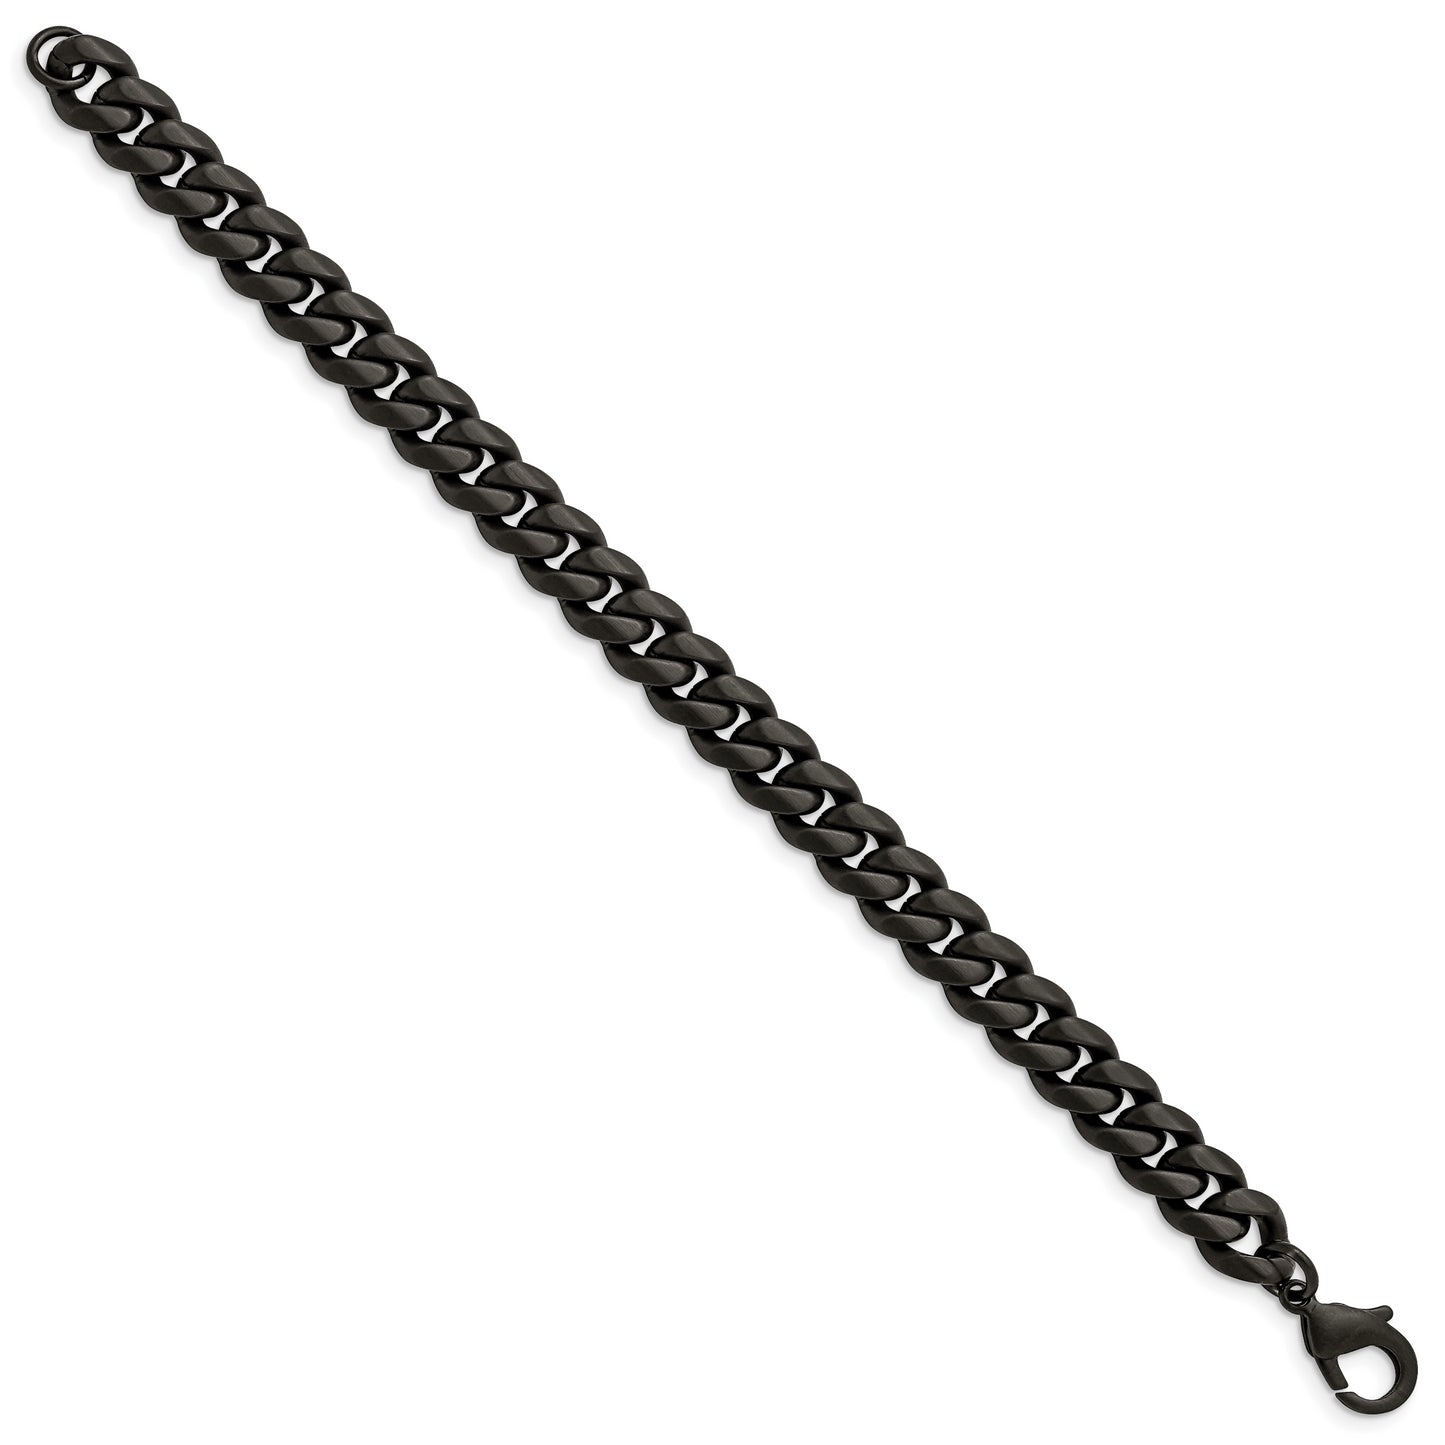 Stainless Steel Brushed Black IP-plated 10mm Curb 8.5in Bracelet